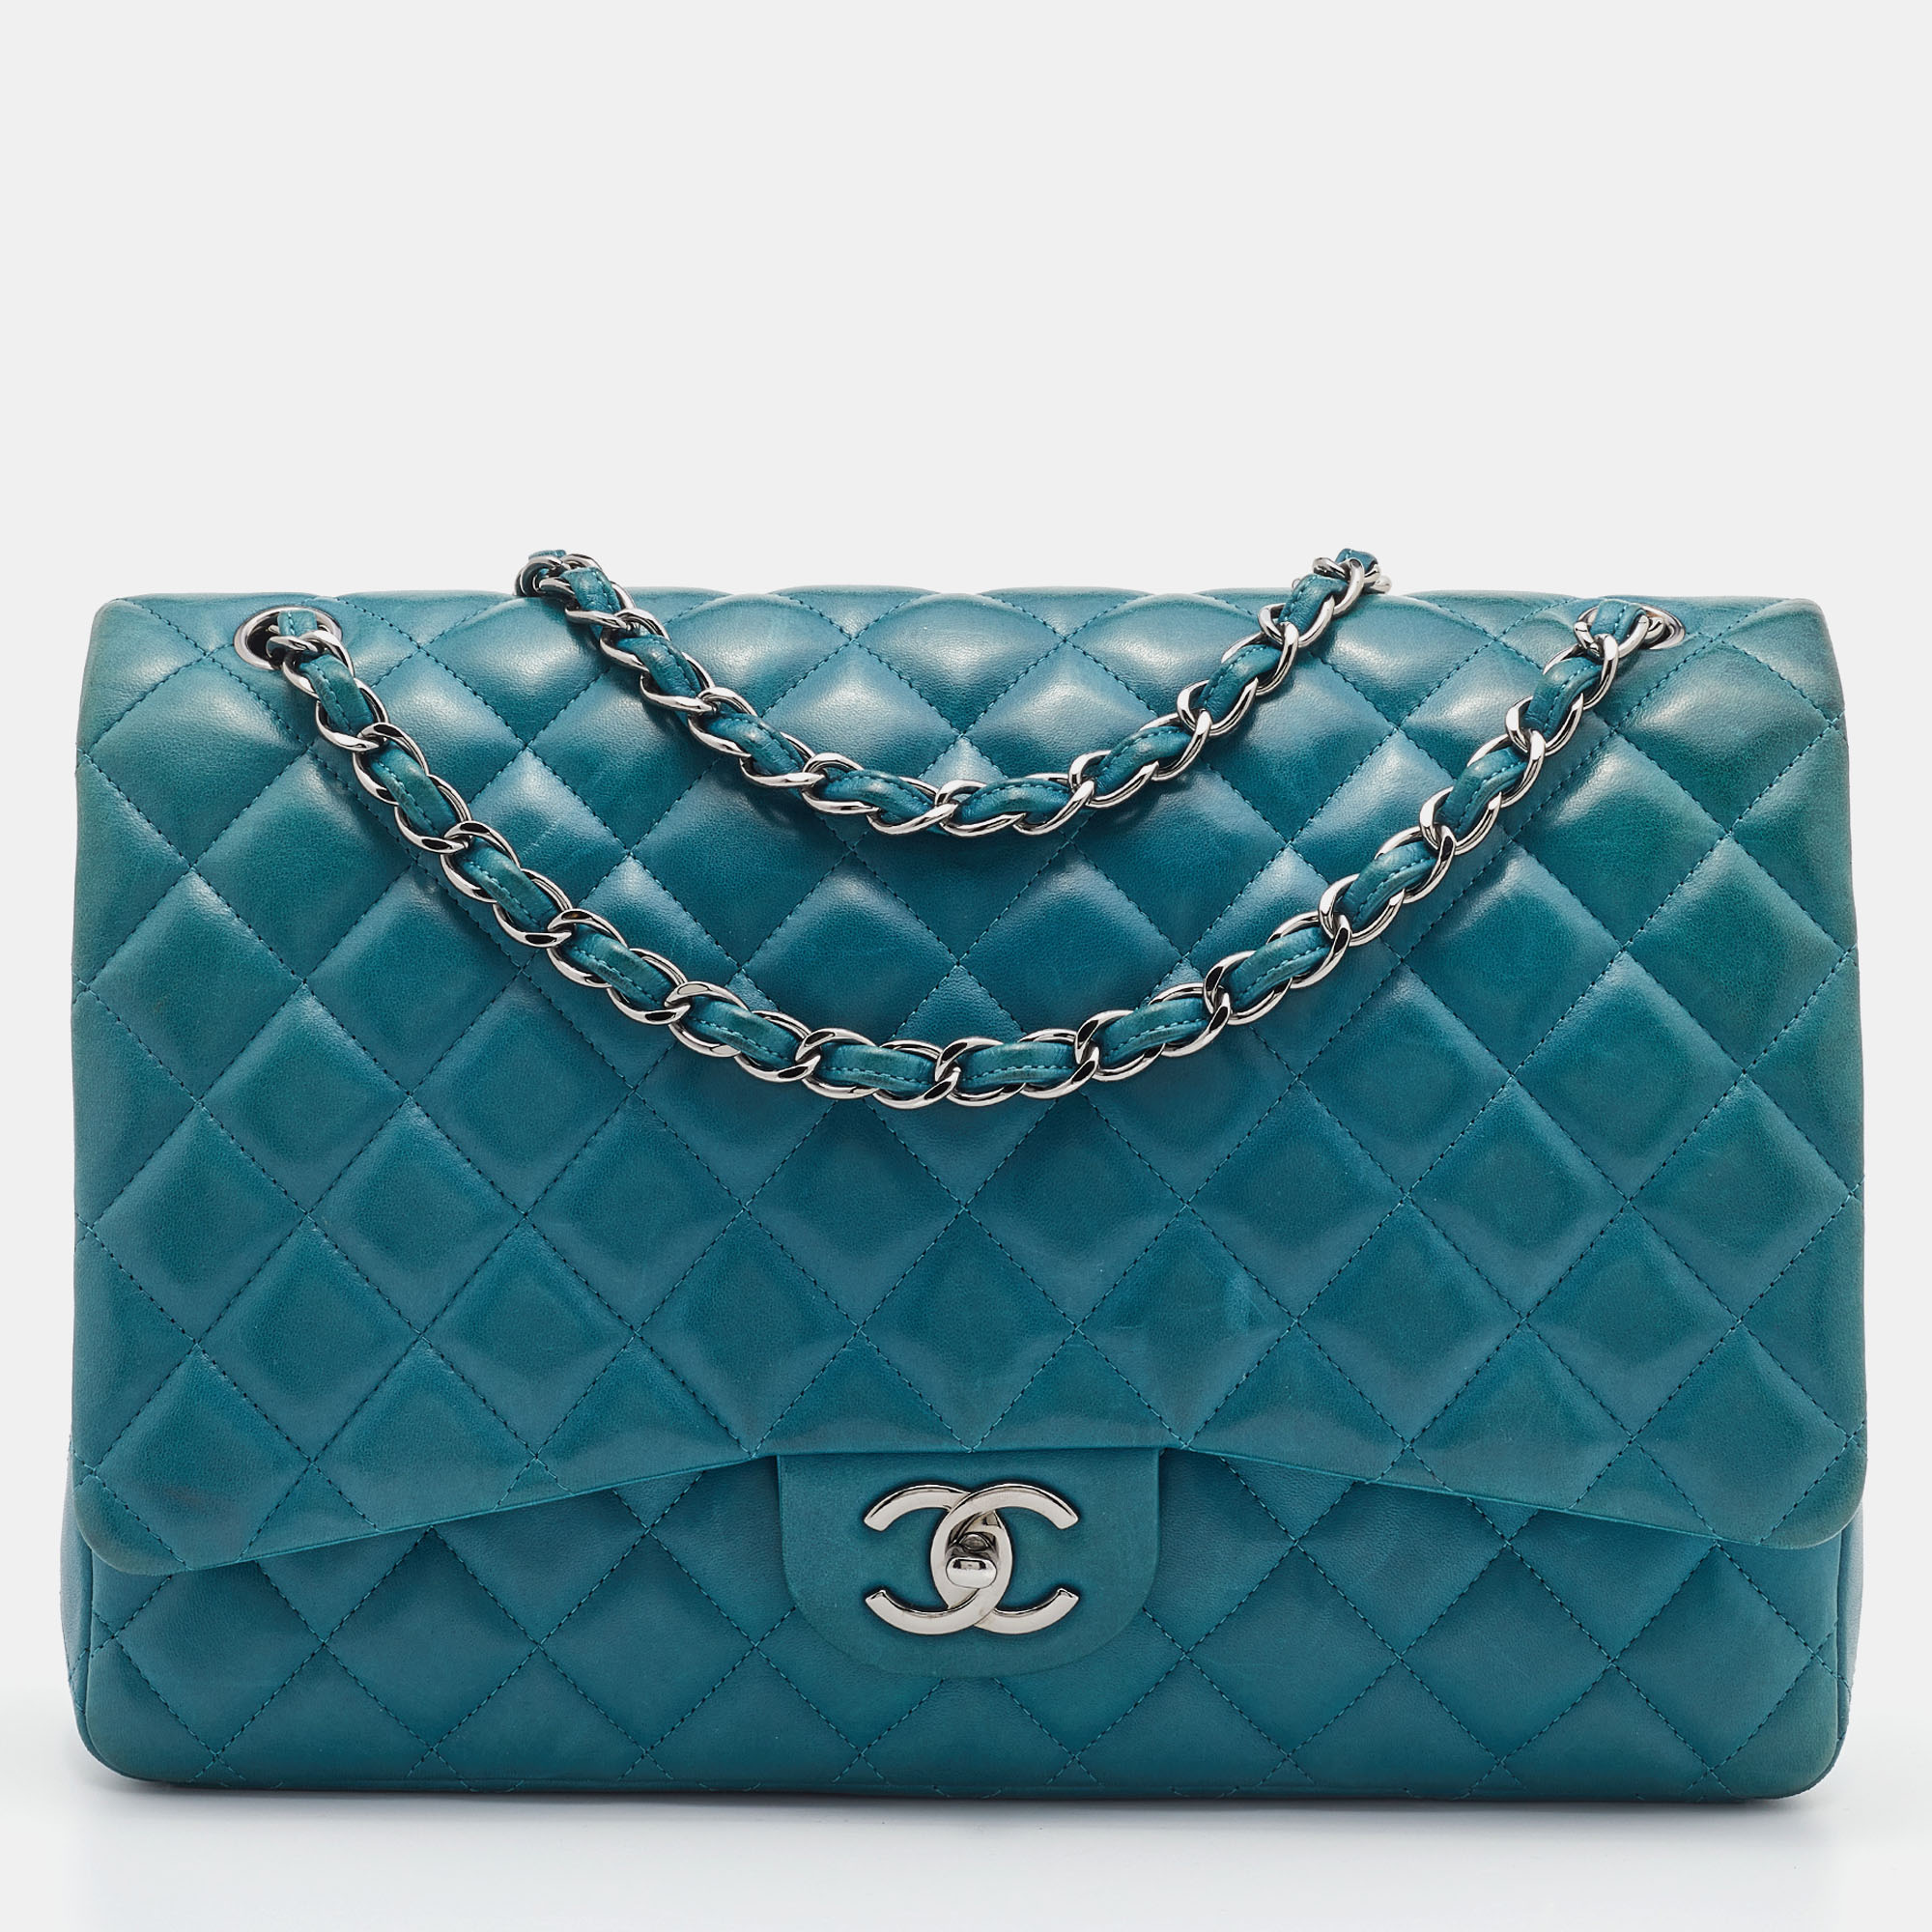 Pre-owned Chanel Green Quilted Leather Maxi Classic Double Flap Bag